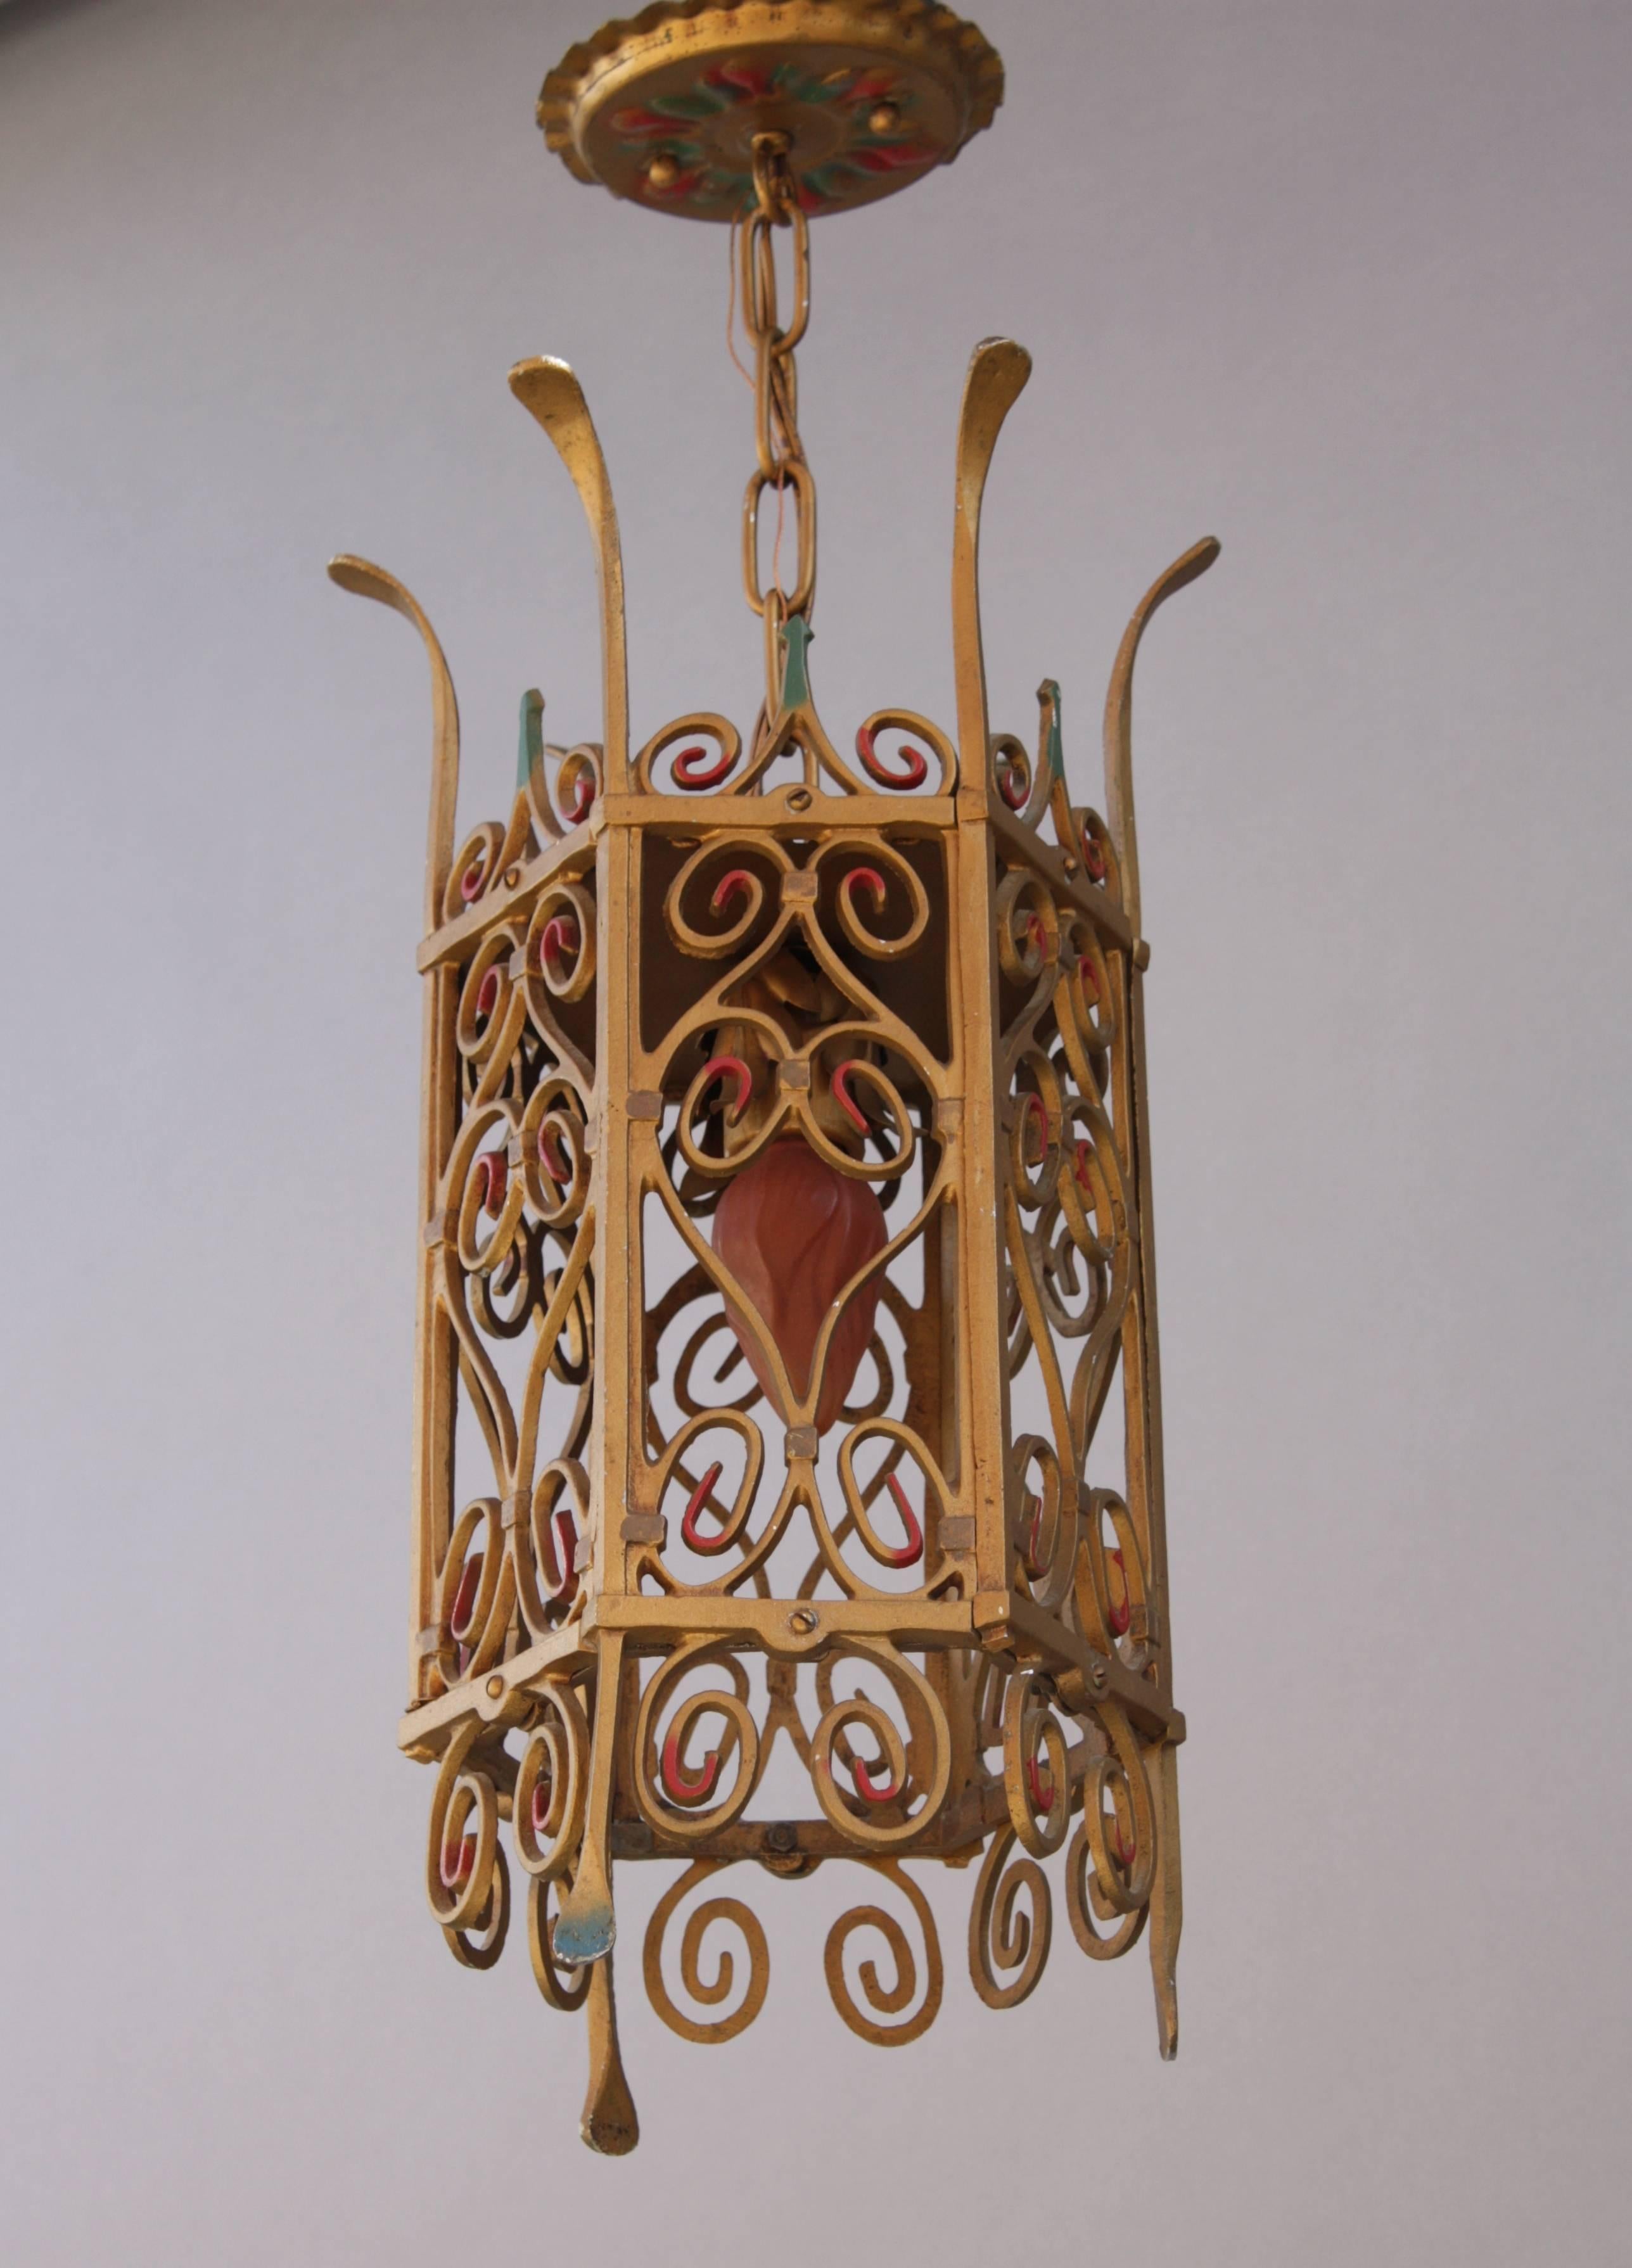 Classic 1920s fixture from a Spanish Revival home. Often found in hallways and entries. 
Measures: 17.5